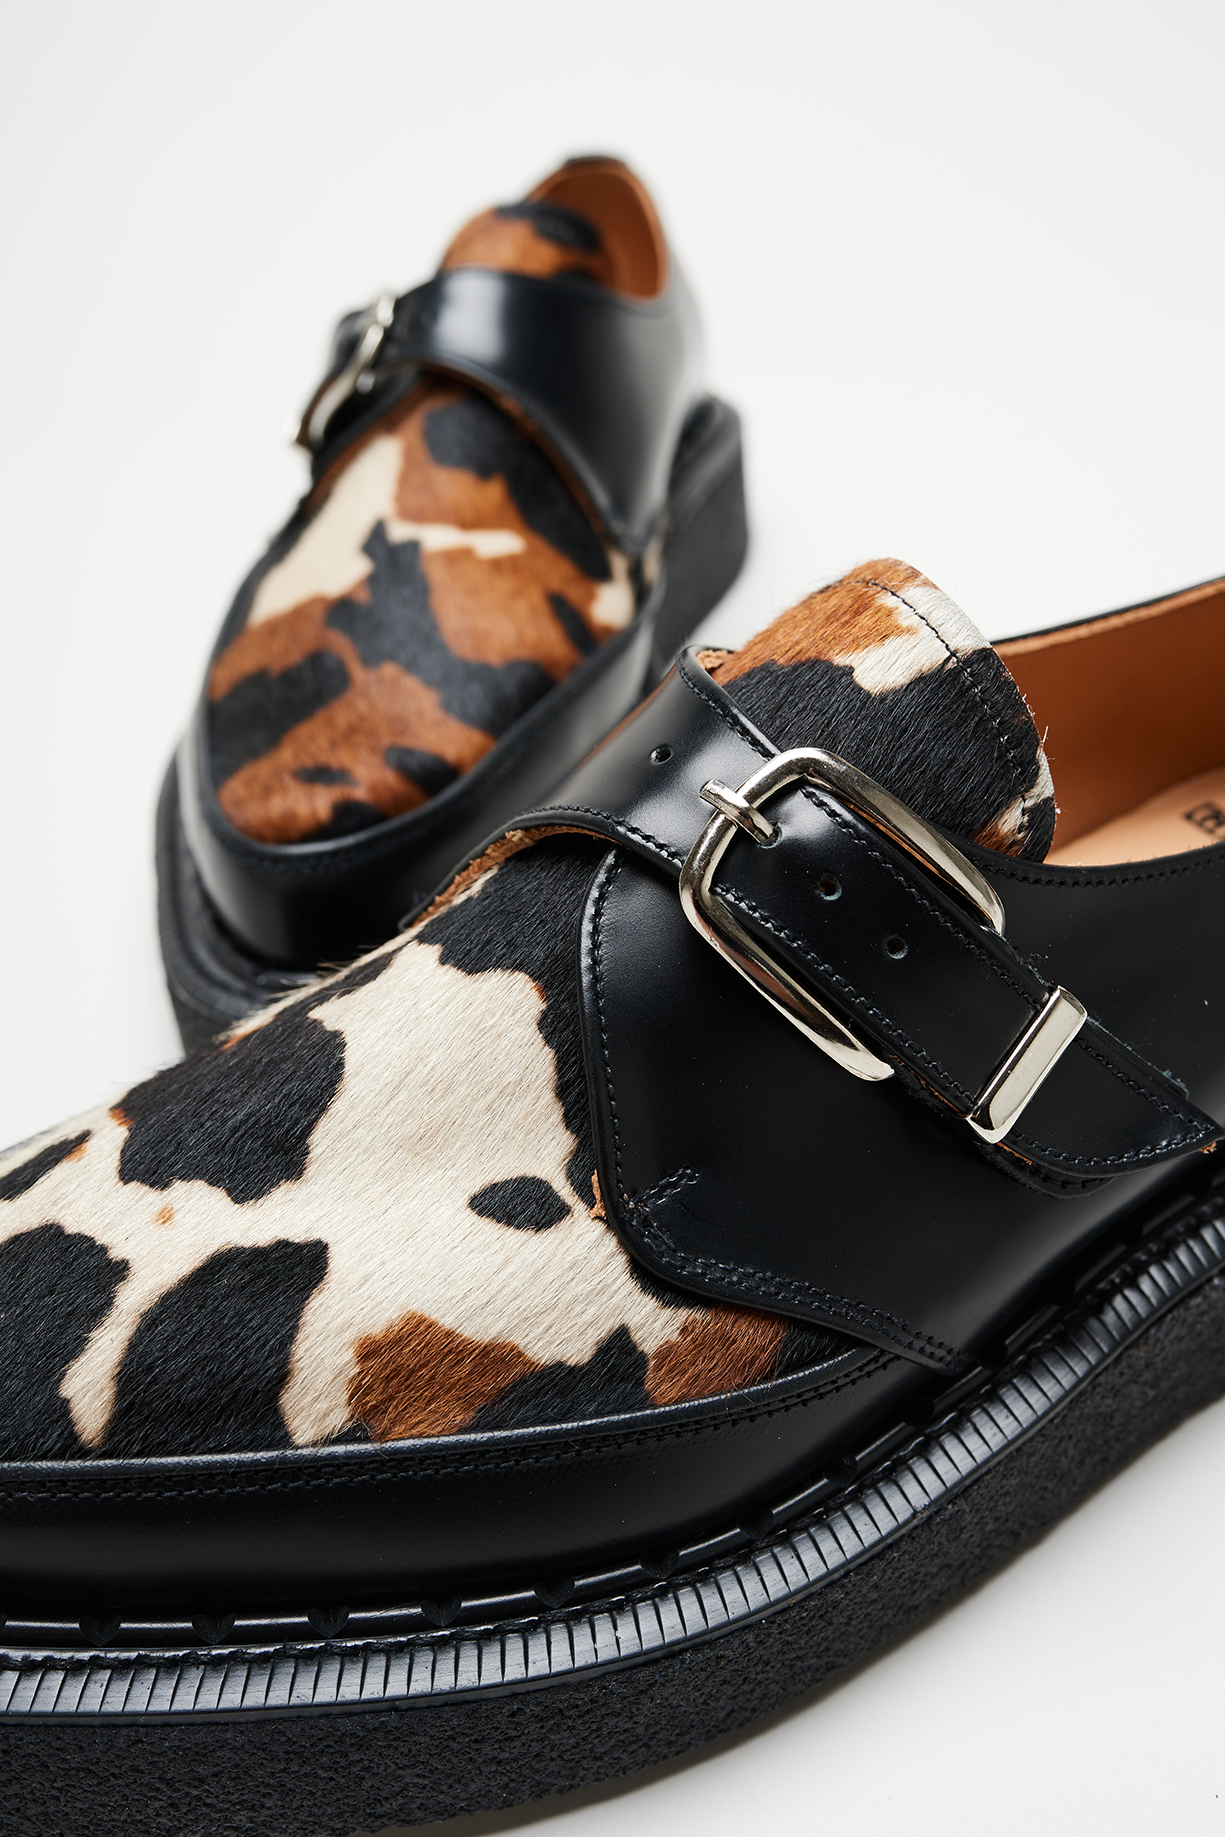 Diano Monk Black/Brown Cow